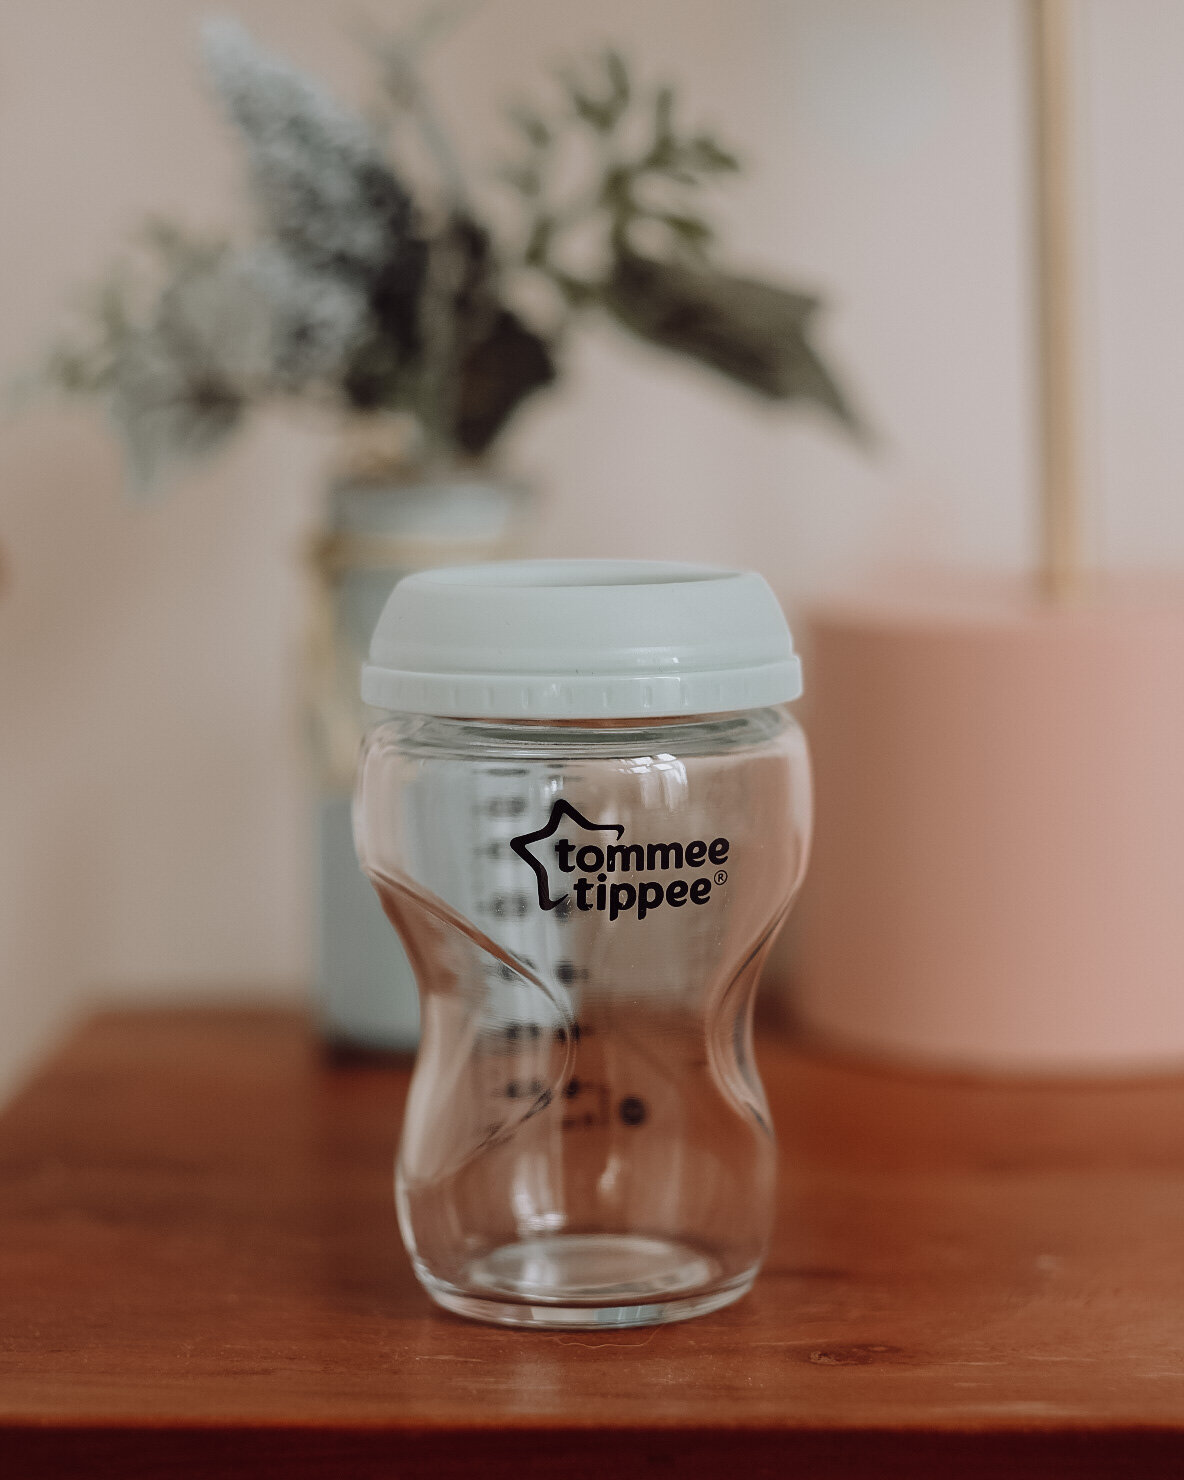 Tommee Tippee Closer to Nature Bottle. — Sheridan Ingalls